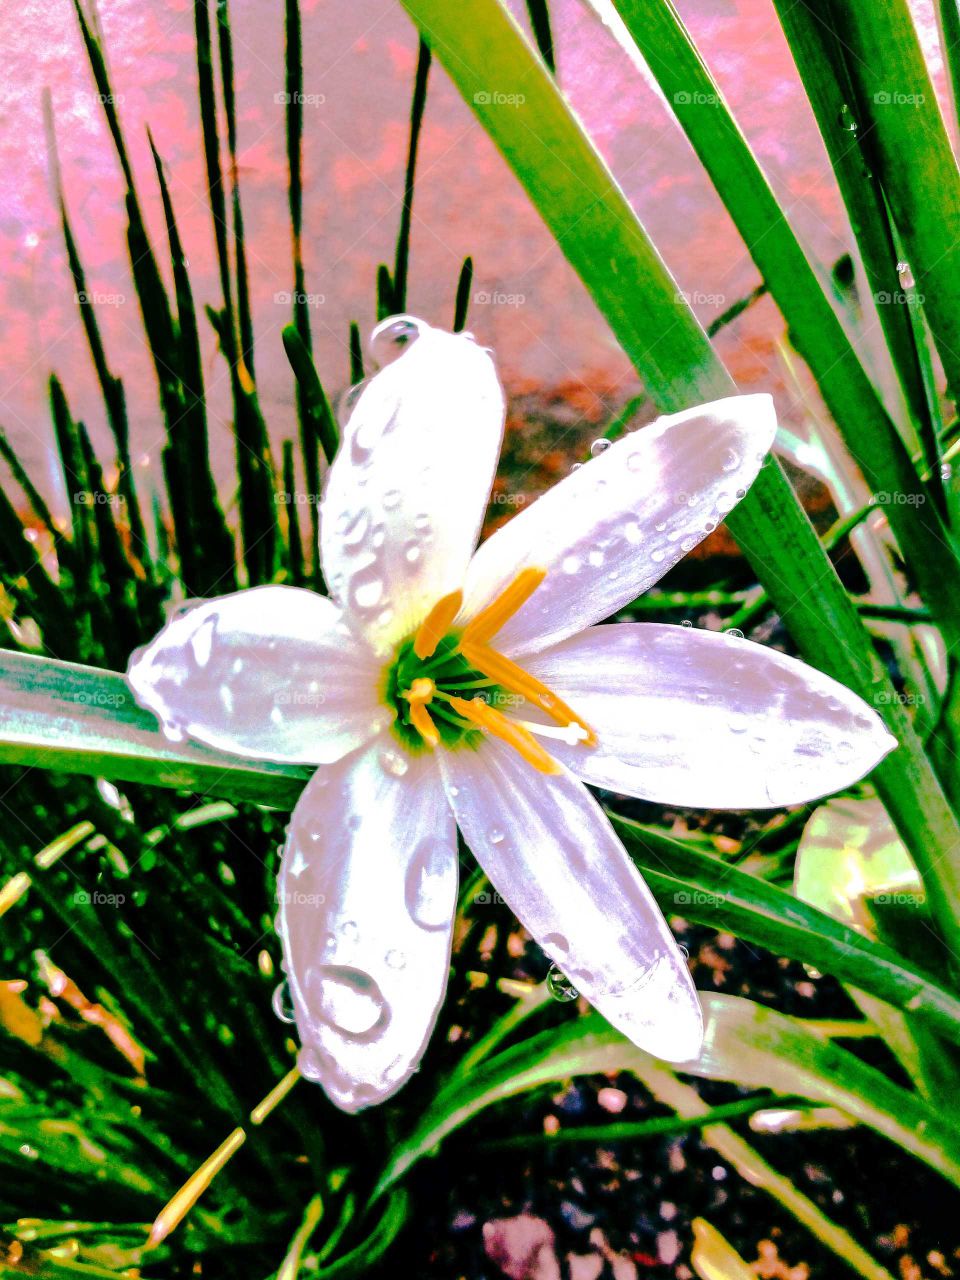 White Lily flower